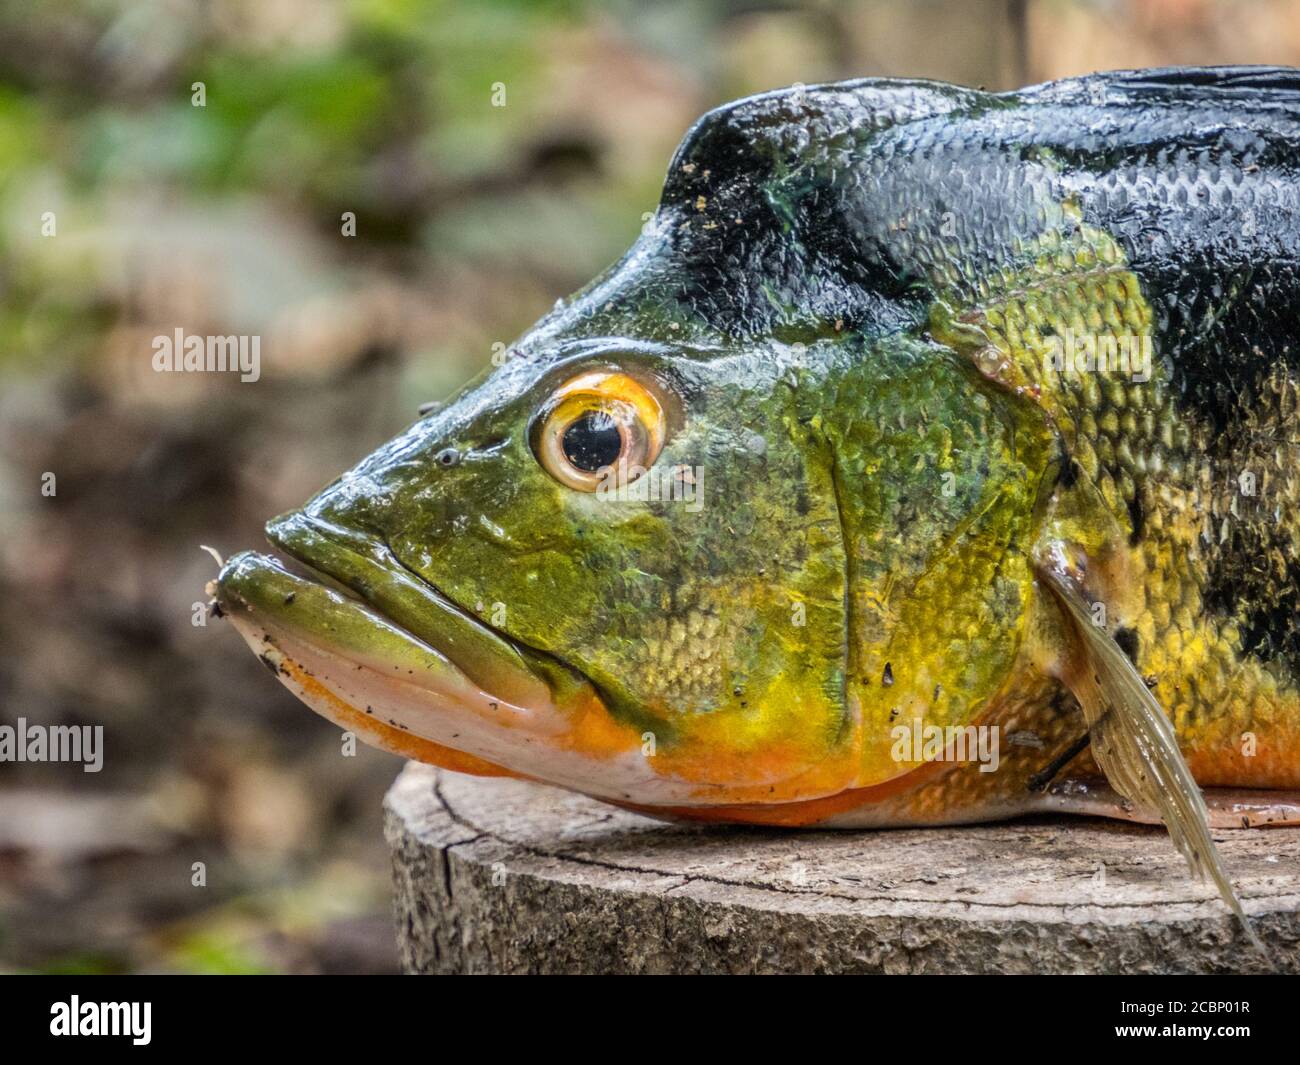 Head of South American fishes. Original name: Peacock Cichlid, Cichla ocellaris. Peacock Bass, Cichlidae family, Amazonia. Stock Photo